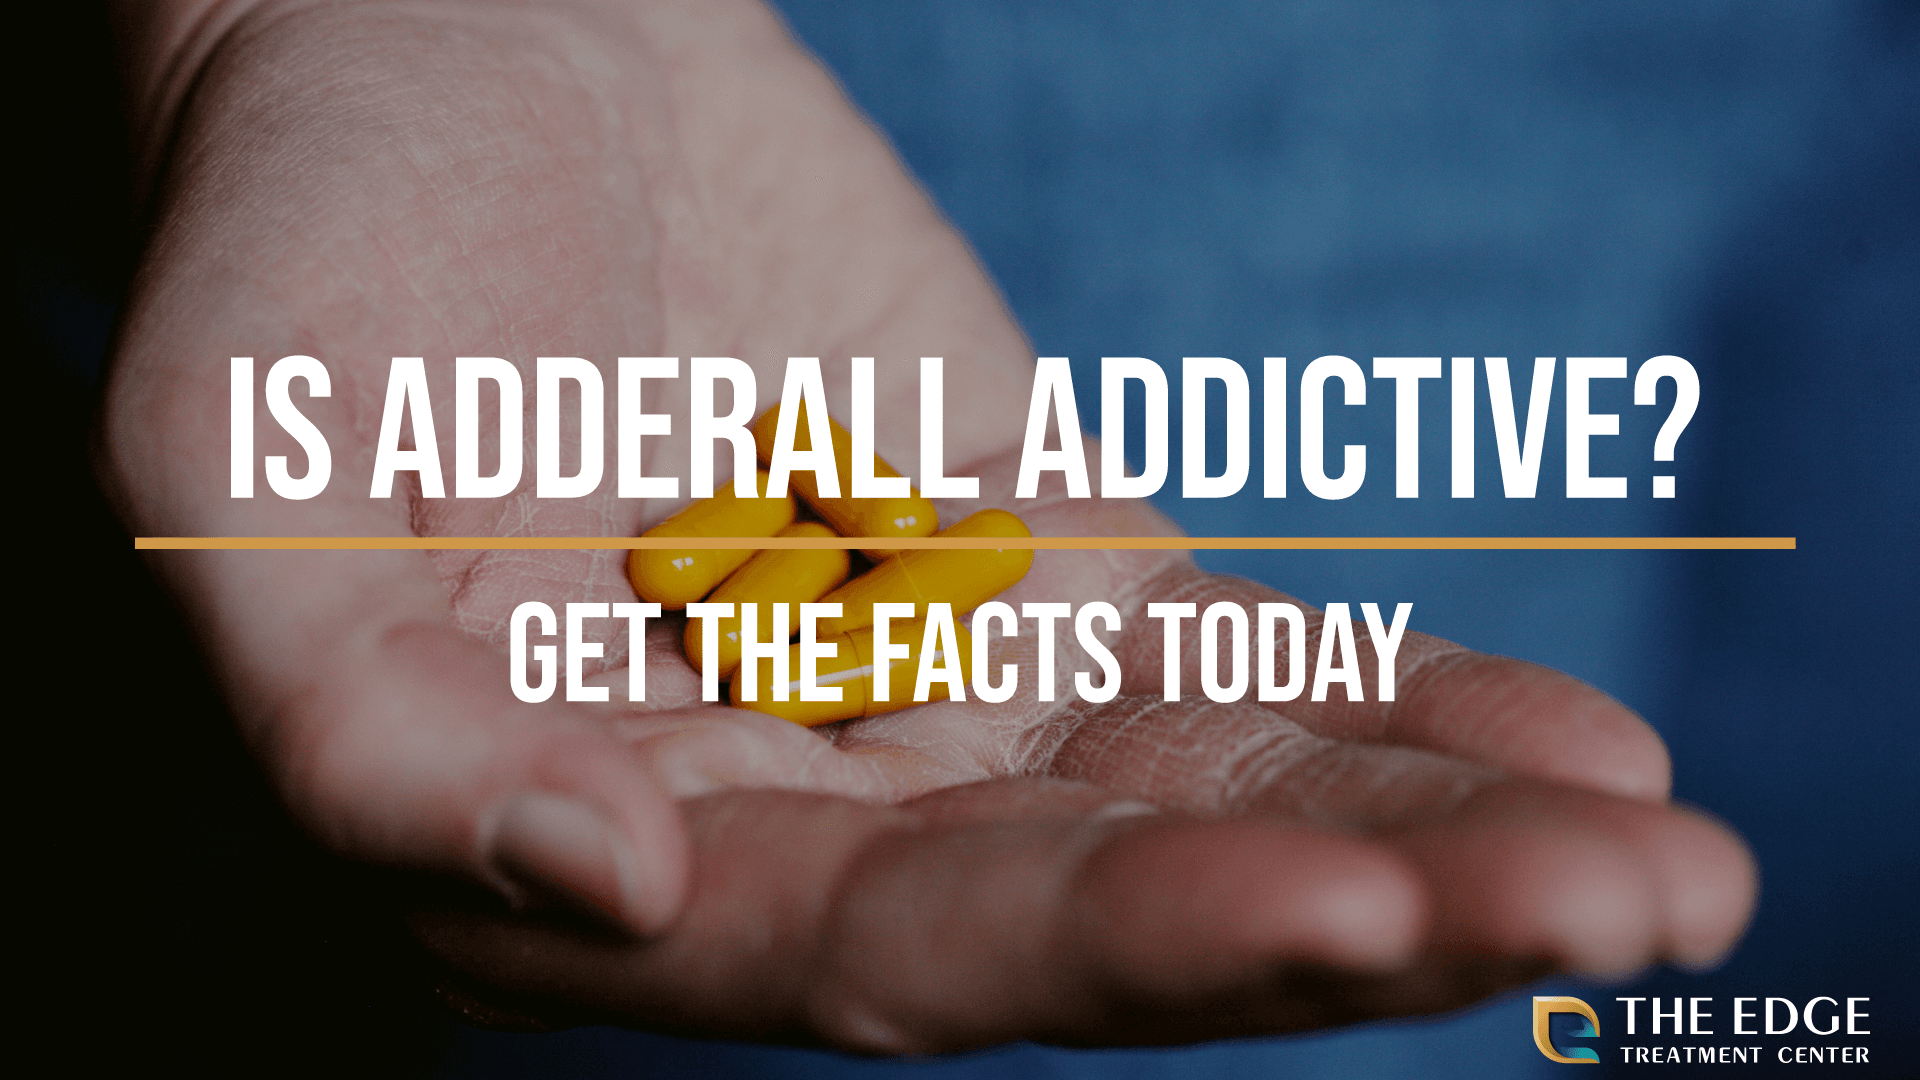 Is Adderall Addictive? Get the Facts Here